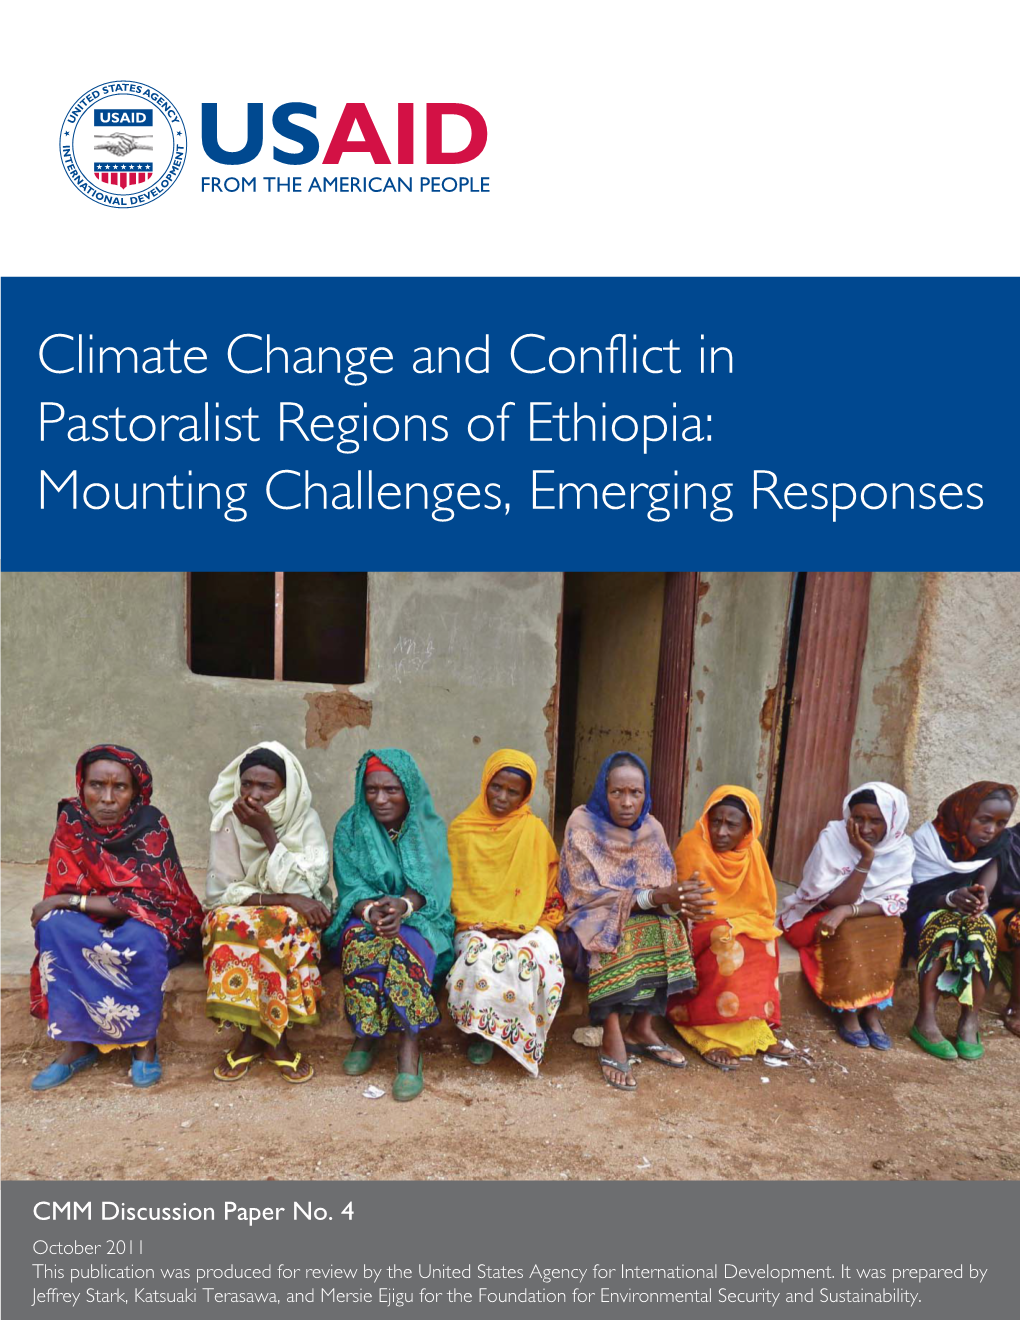 Climate Change and Conflict in Pastoralist Regions of Ethiopia: Mounting Challenges, Emerging Responses